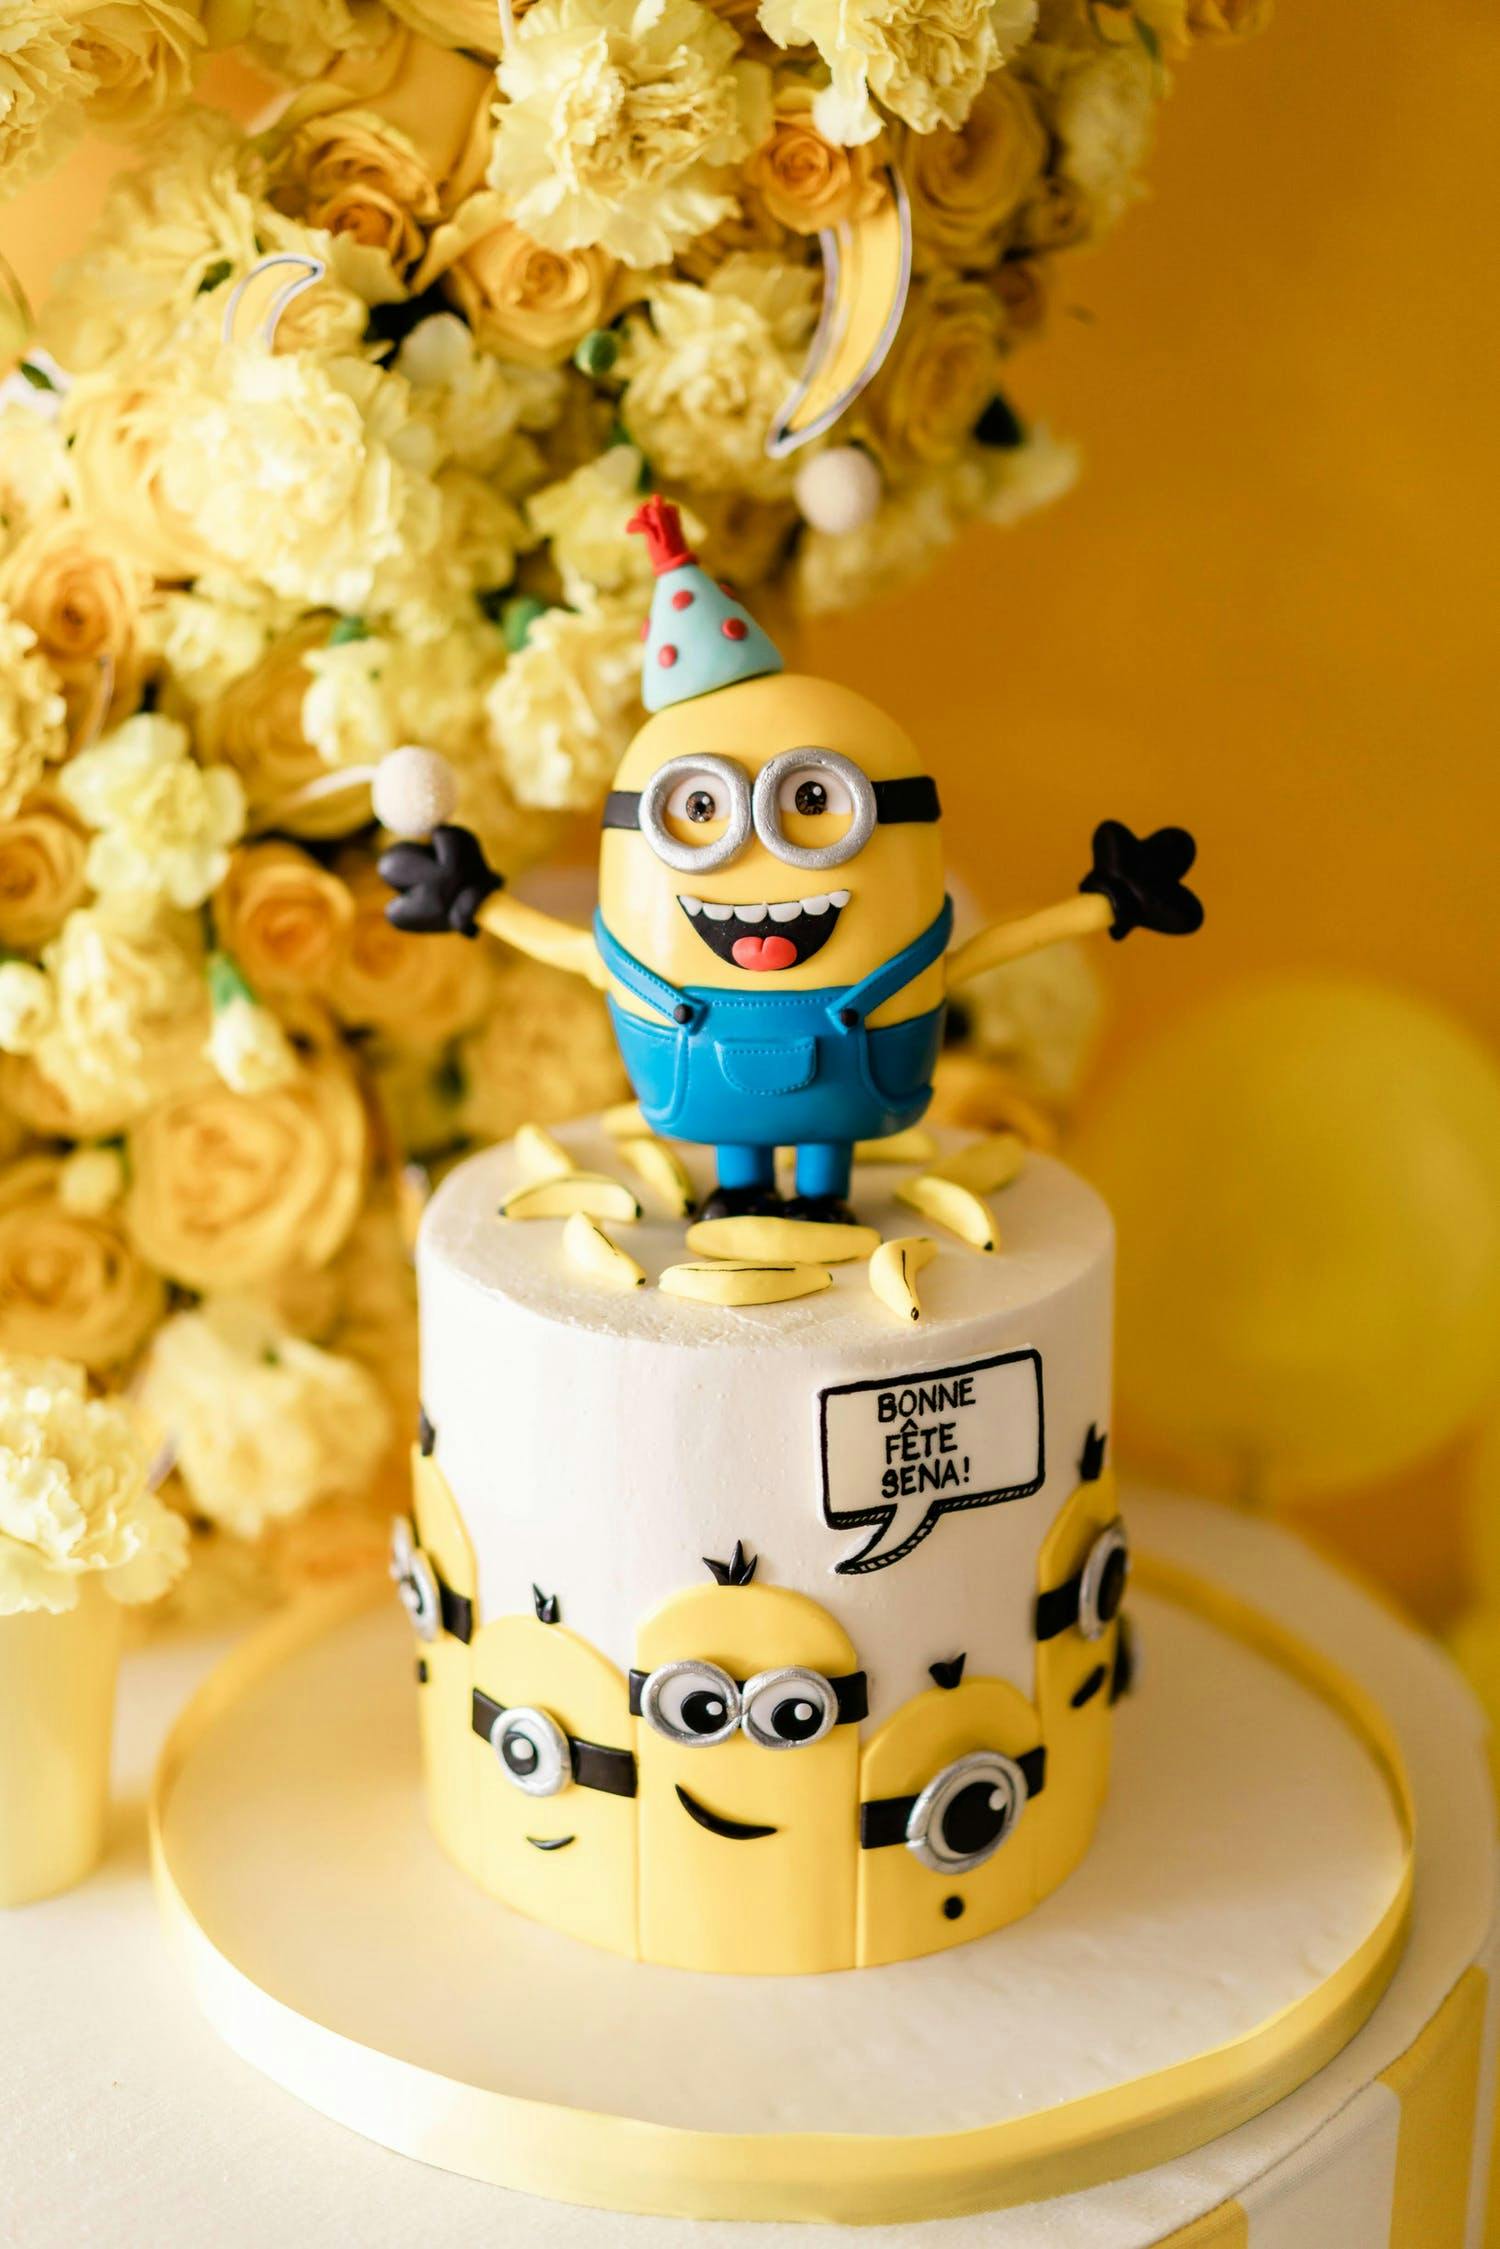 Despicable Me Minions Themes Party With Minions Cake and Yellow Florals | PartySlate